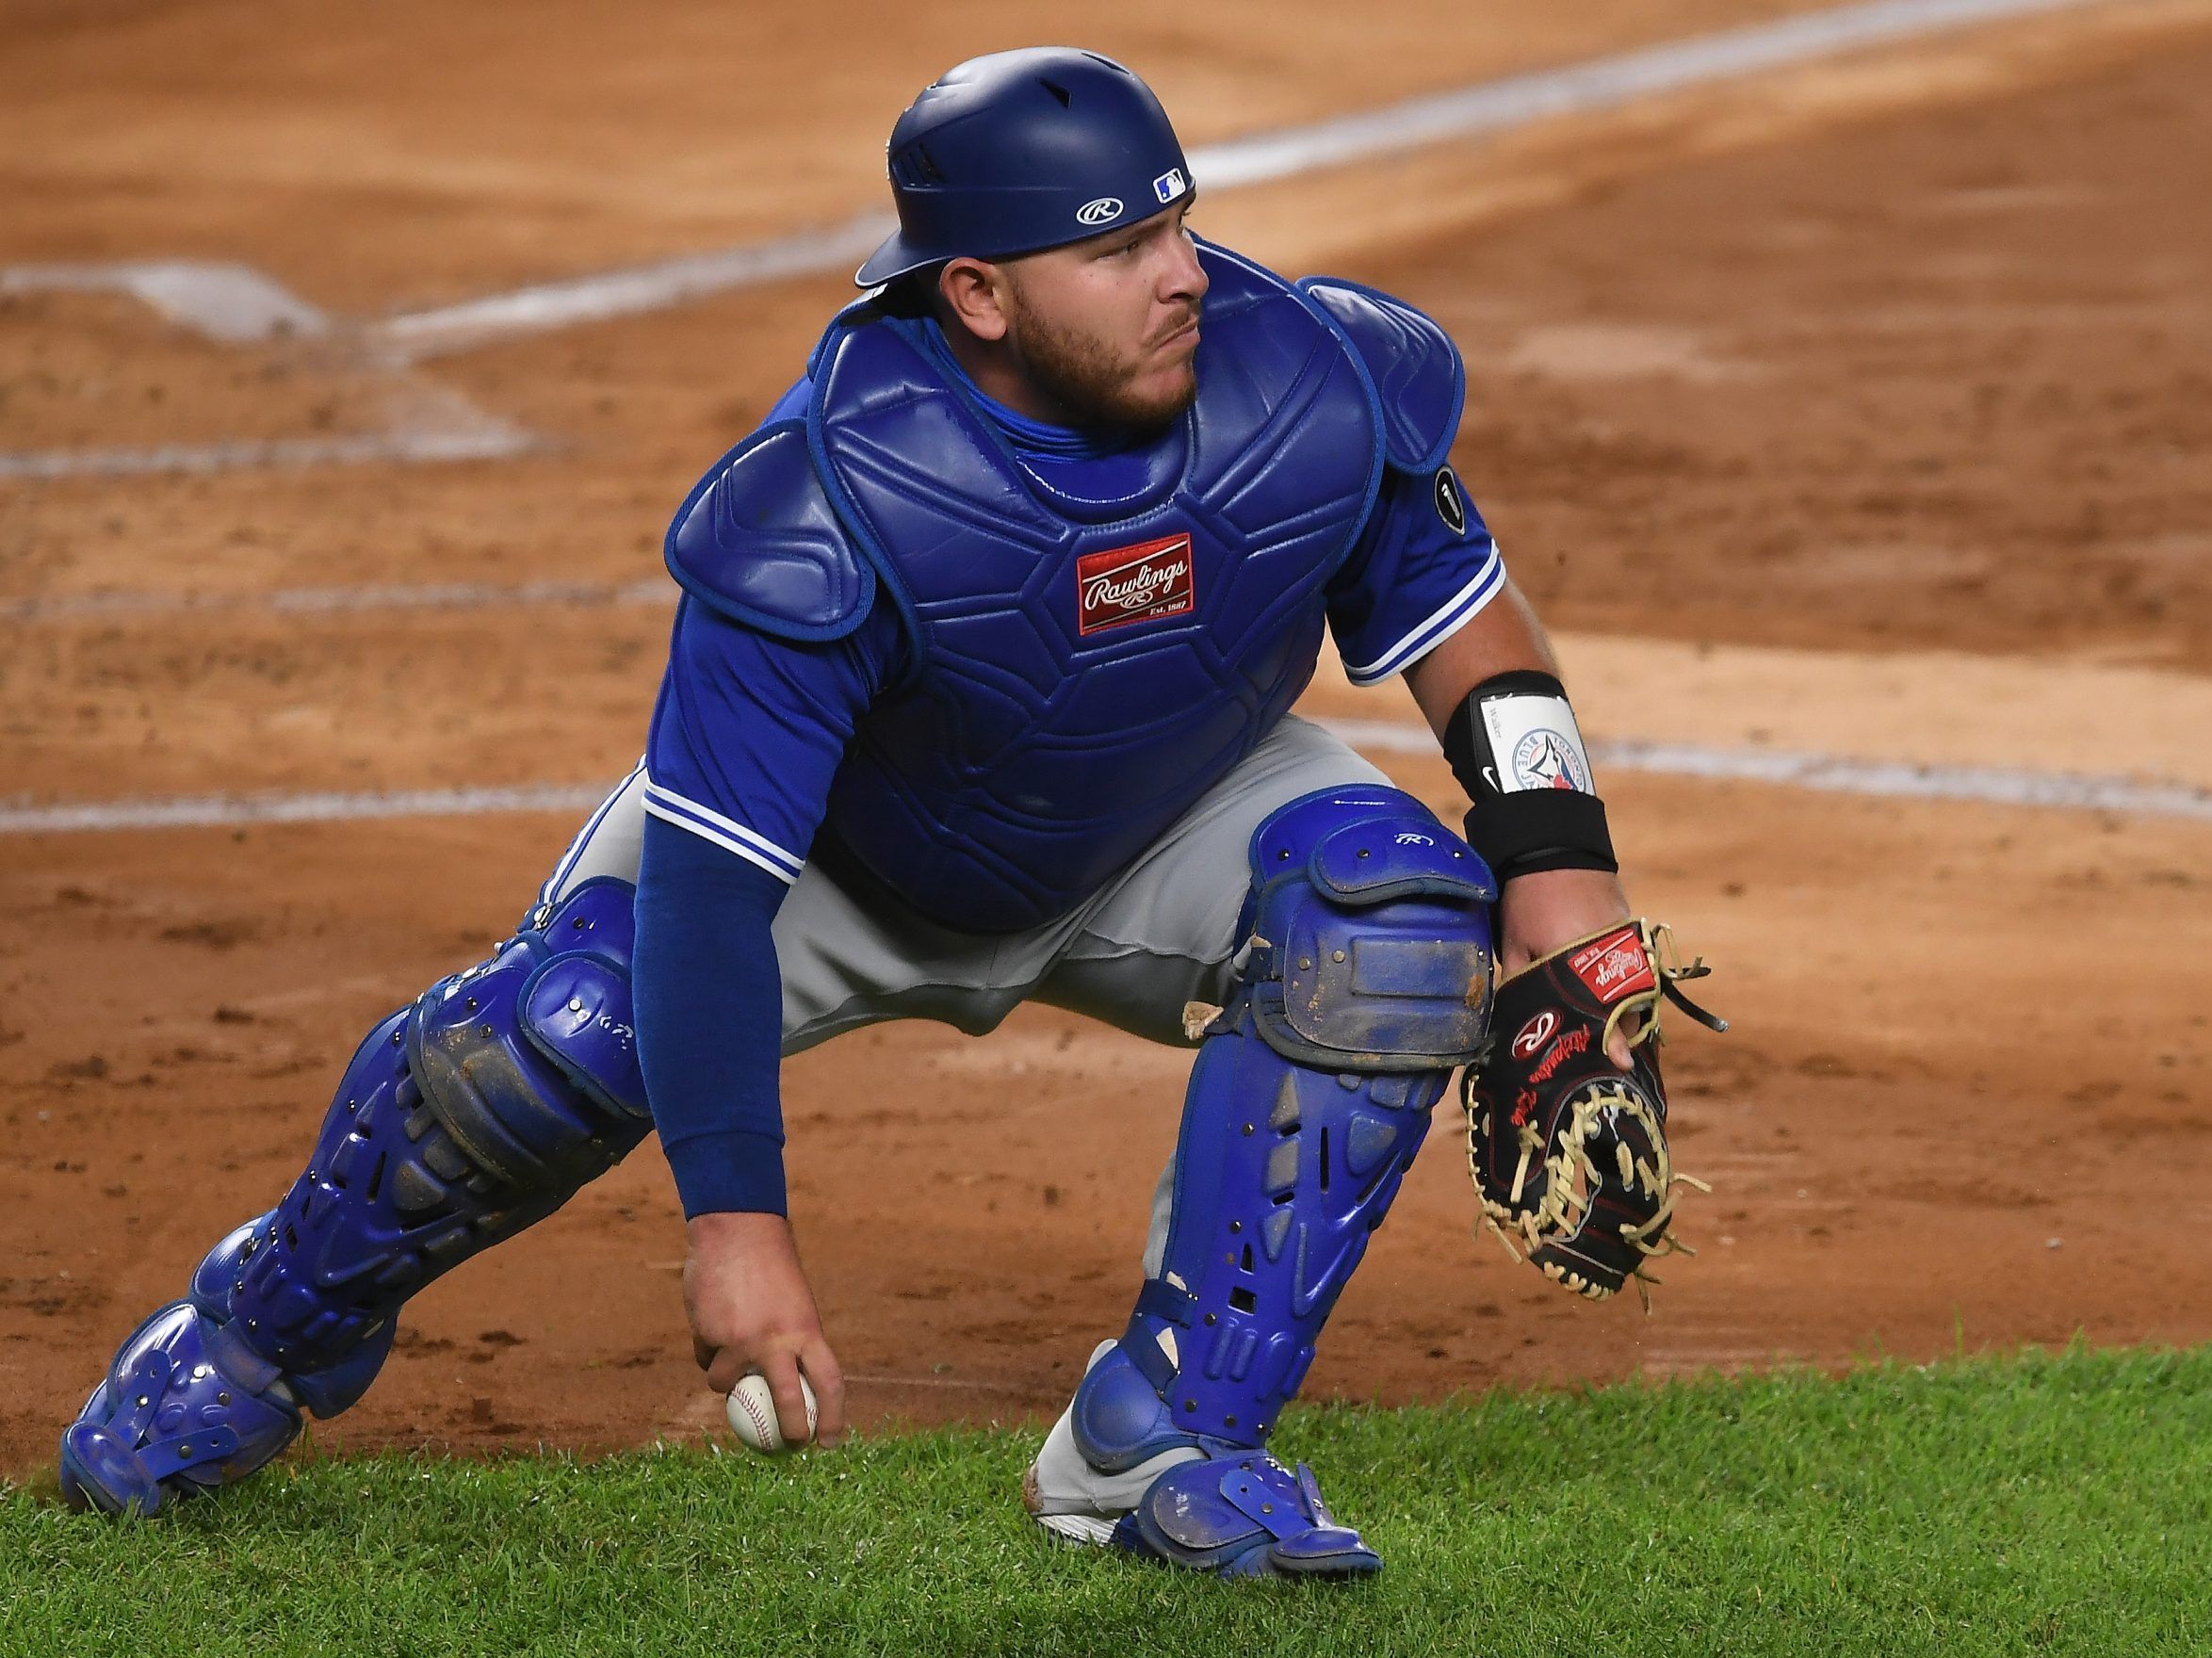 Catcher Kirk will have a chance to start season with Blue Jays